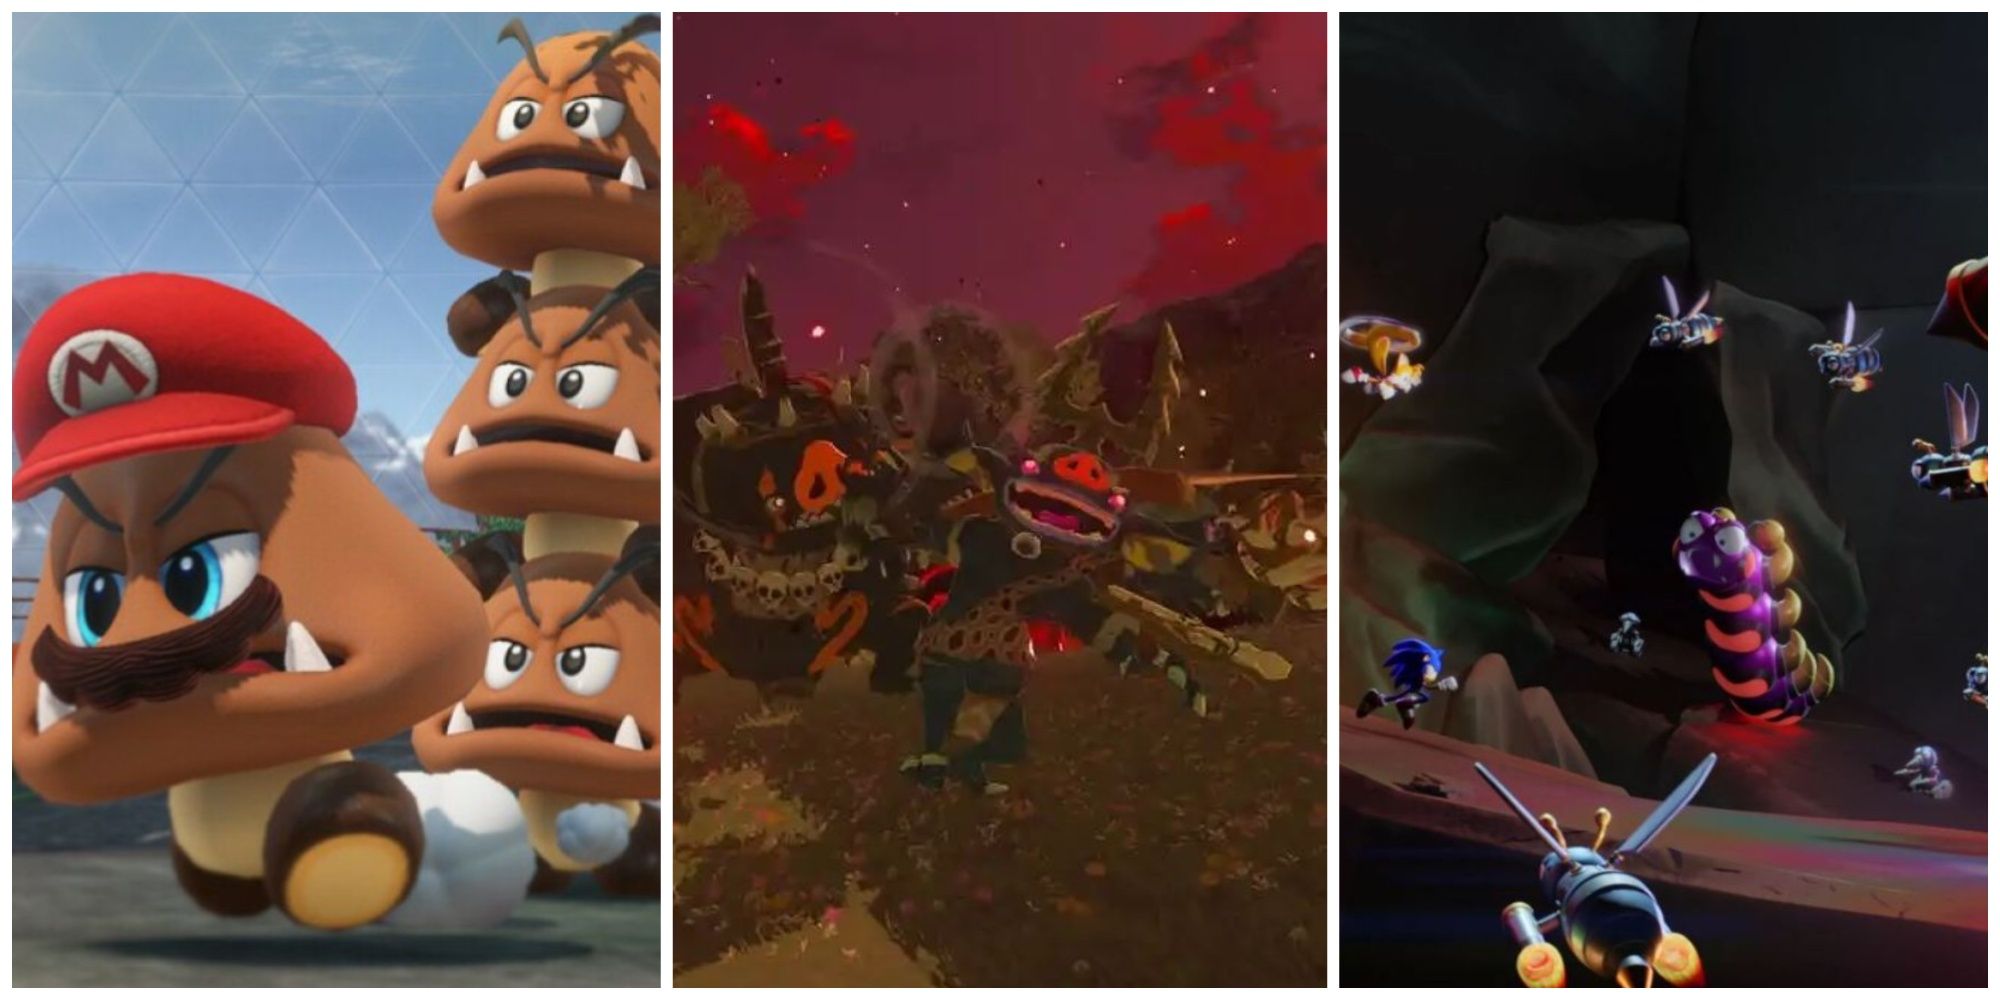 Goombas from Mario, Bokoblins from the Legend of Zelda, and Badniks from Sonic